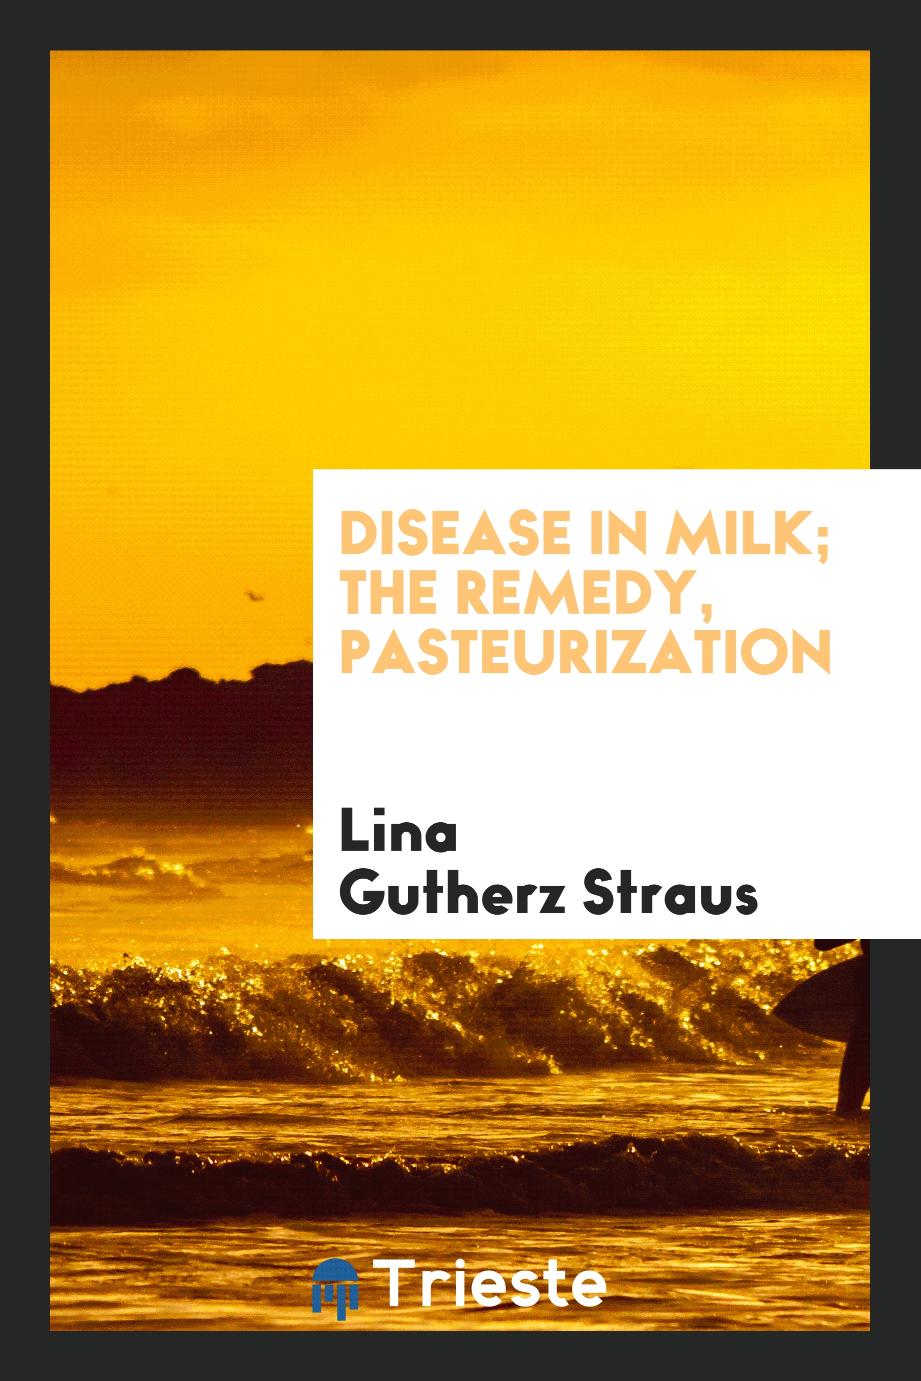 Disease in milk; the remedy, pasteurization